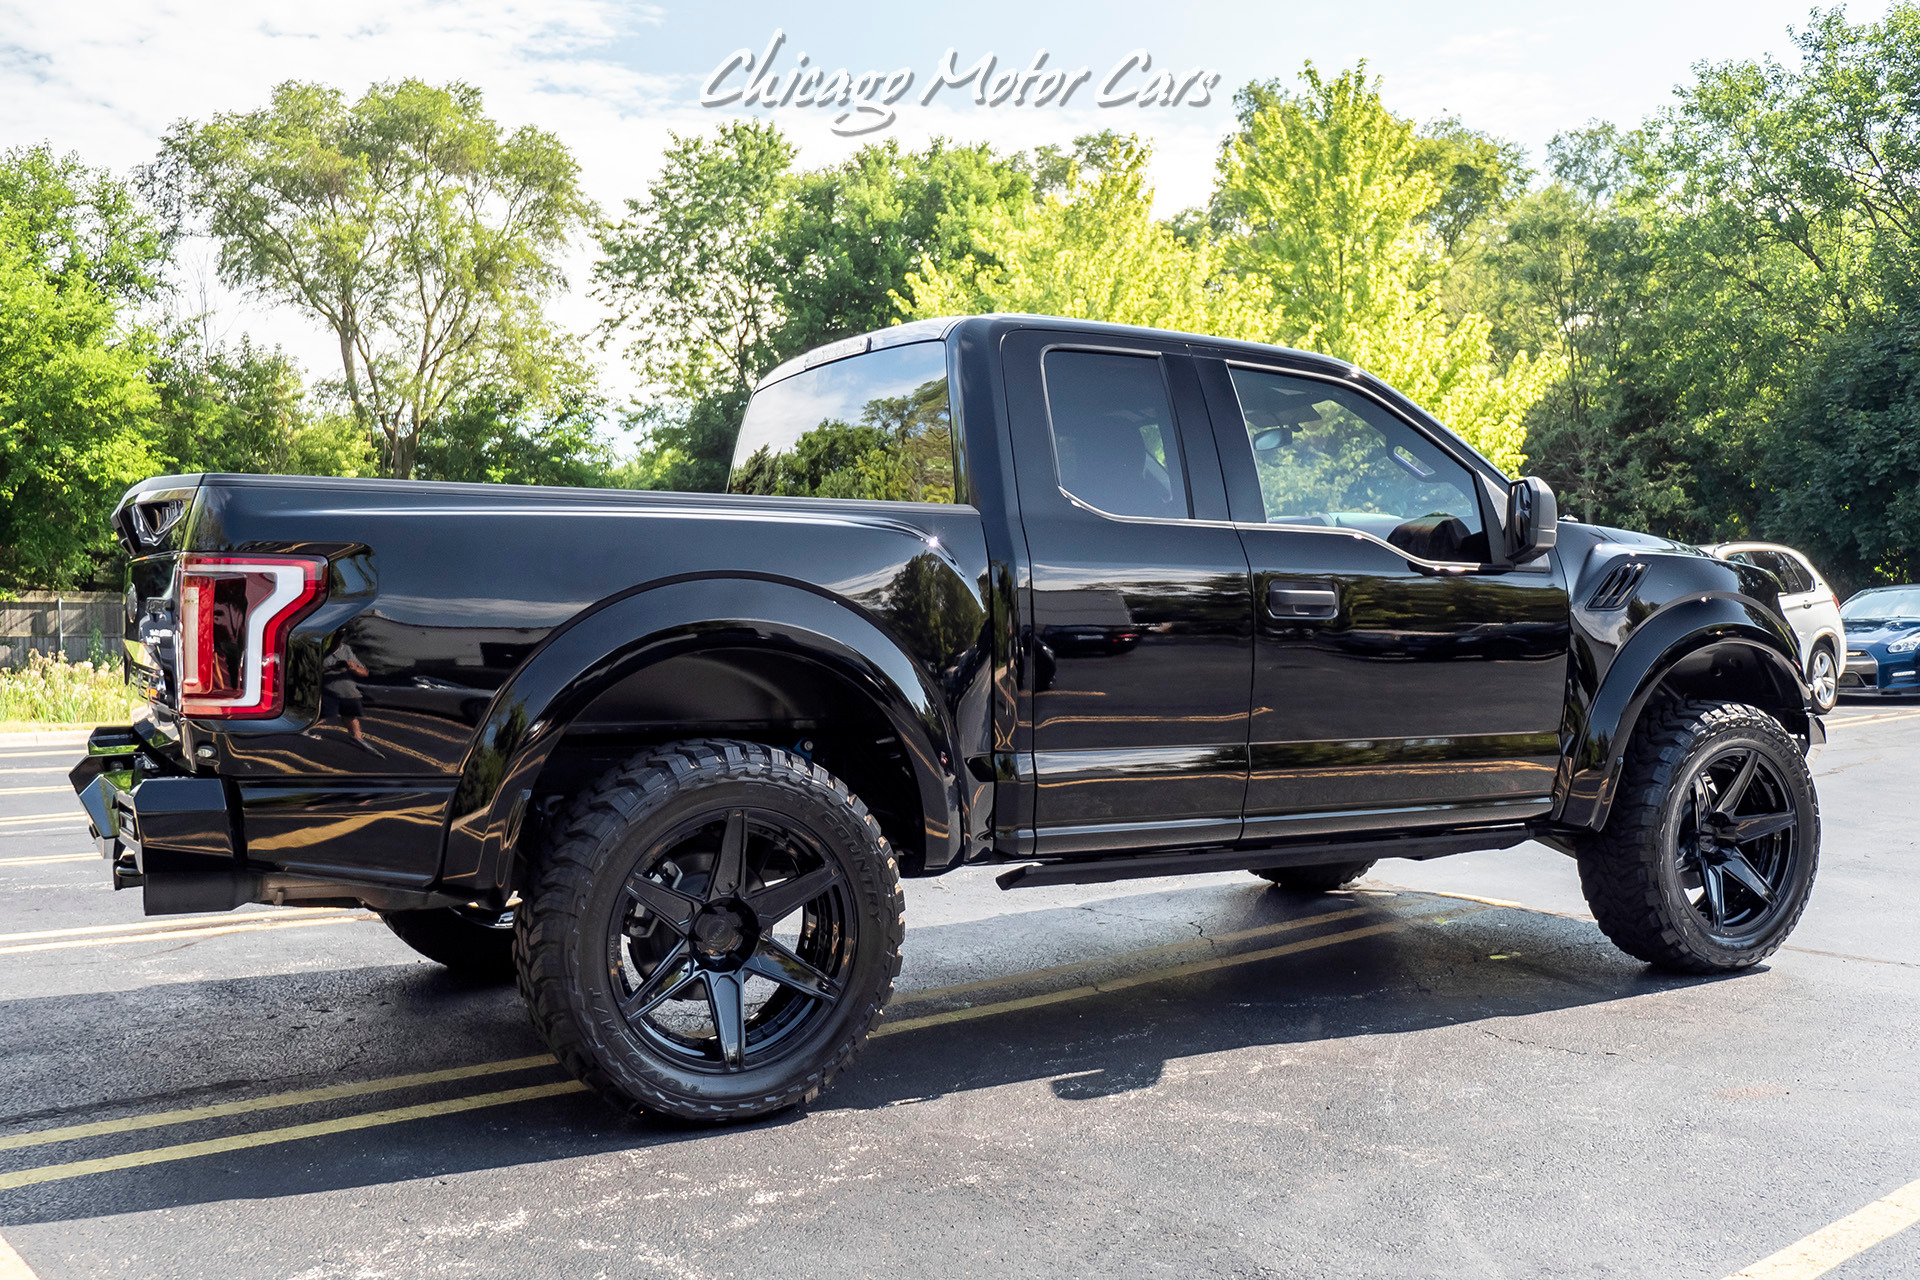 Used 2018 Ford F-150 Raptor THOUSAND$ in UPGRADES! 4x4 For Sale